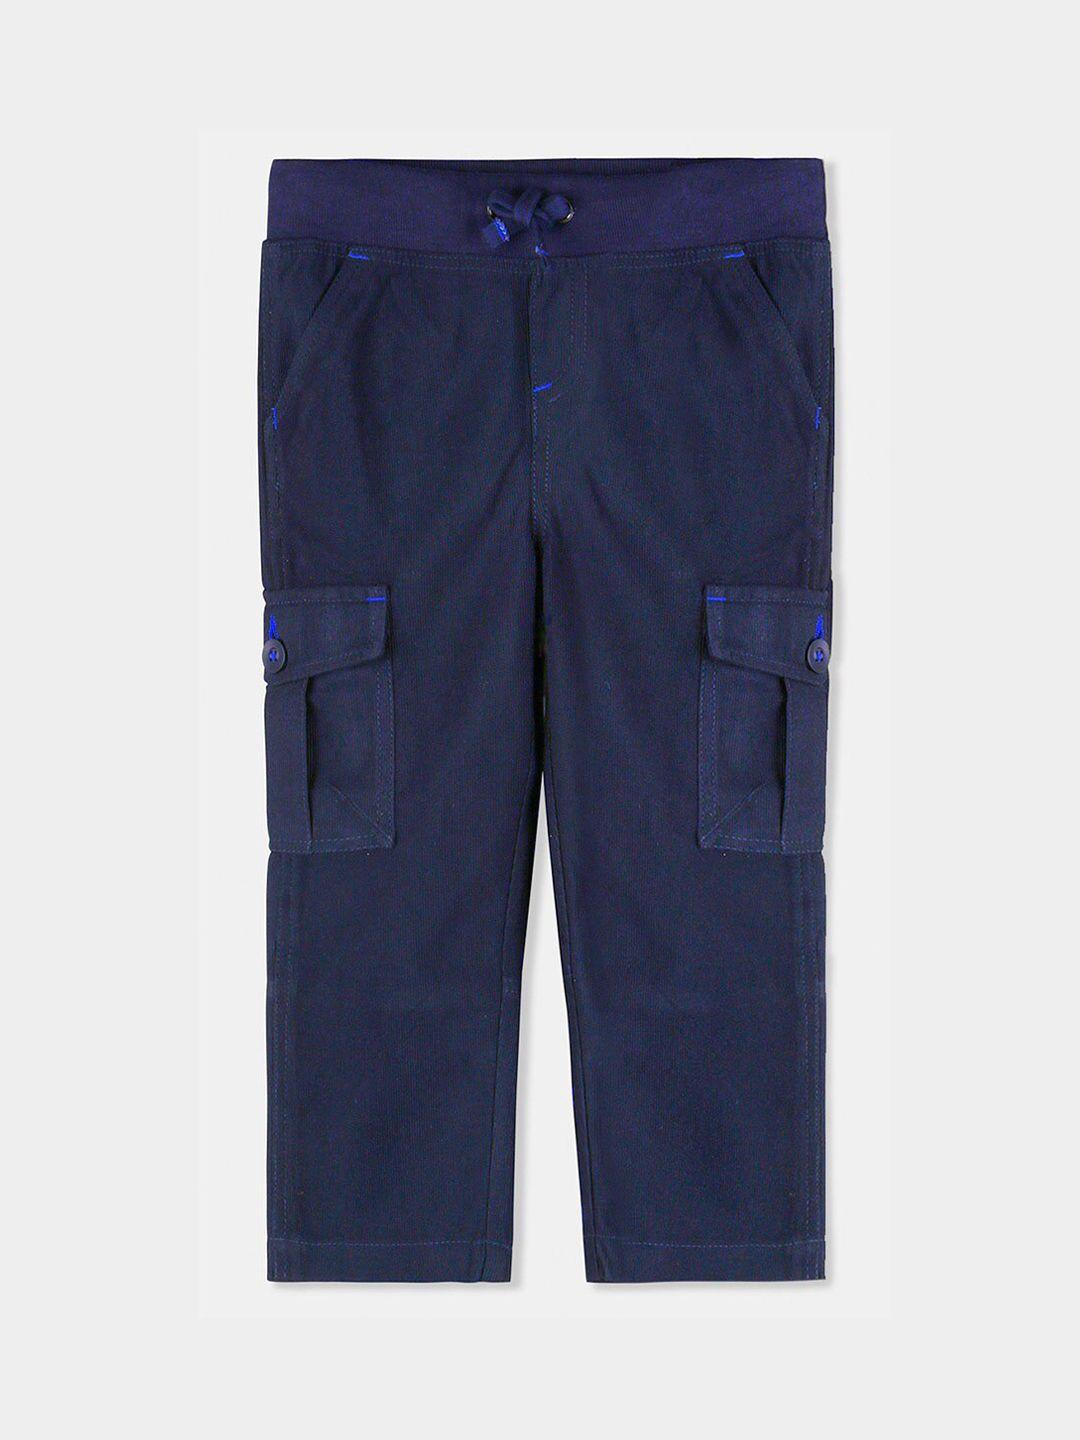 cherry crumble boys navy blue regular fit solid cargos